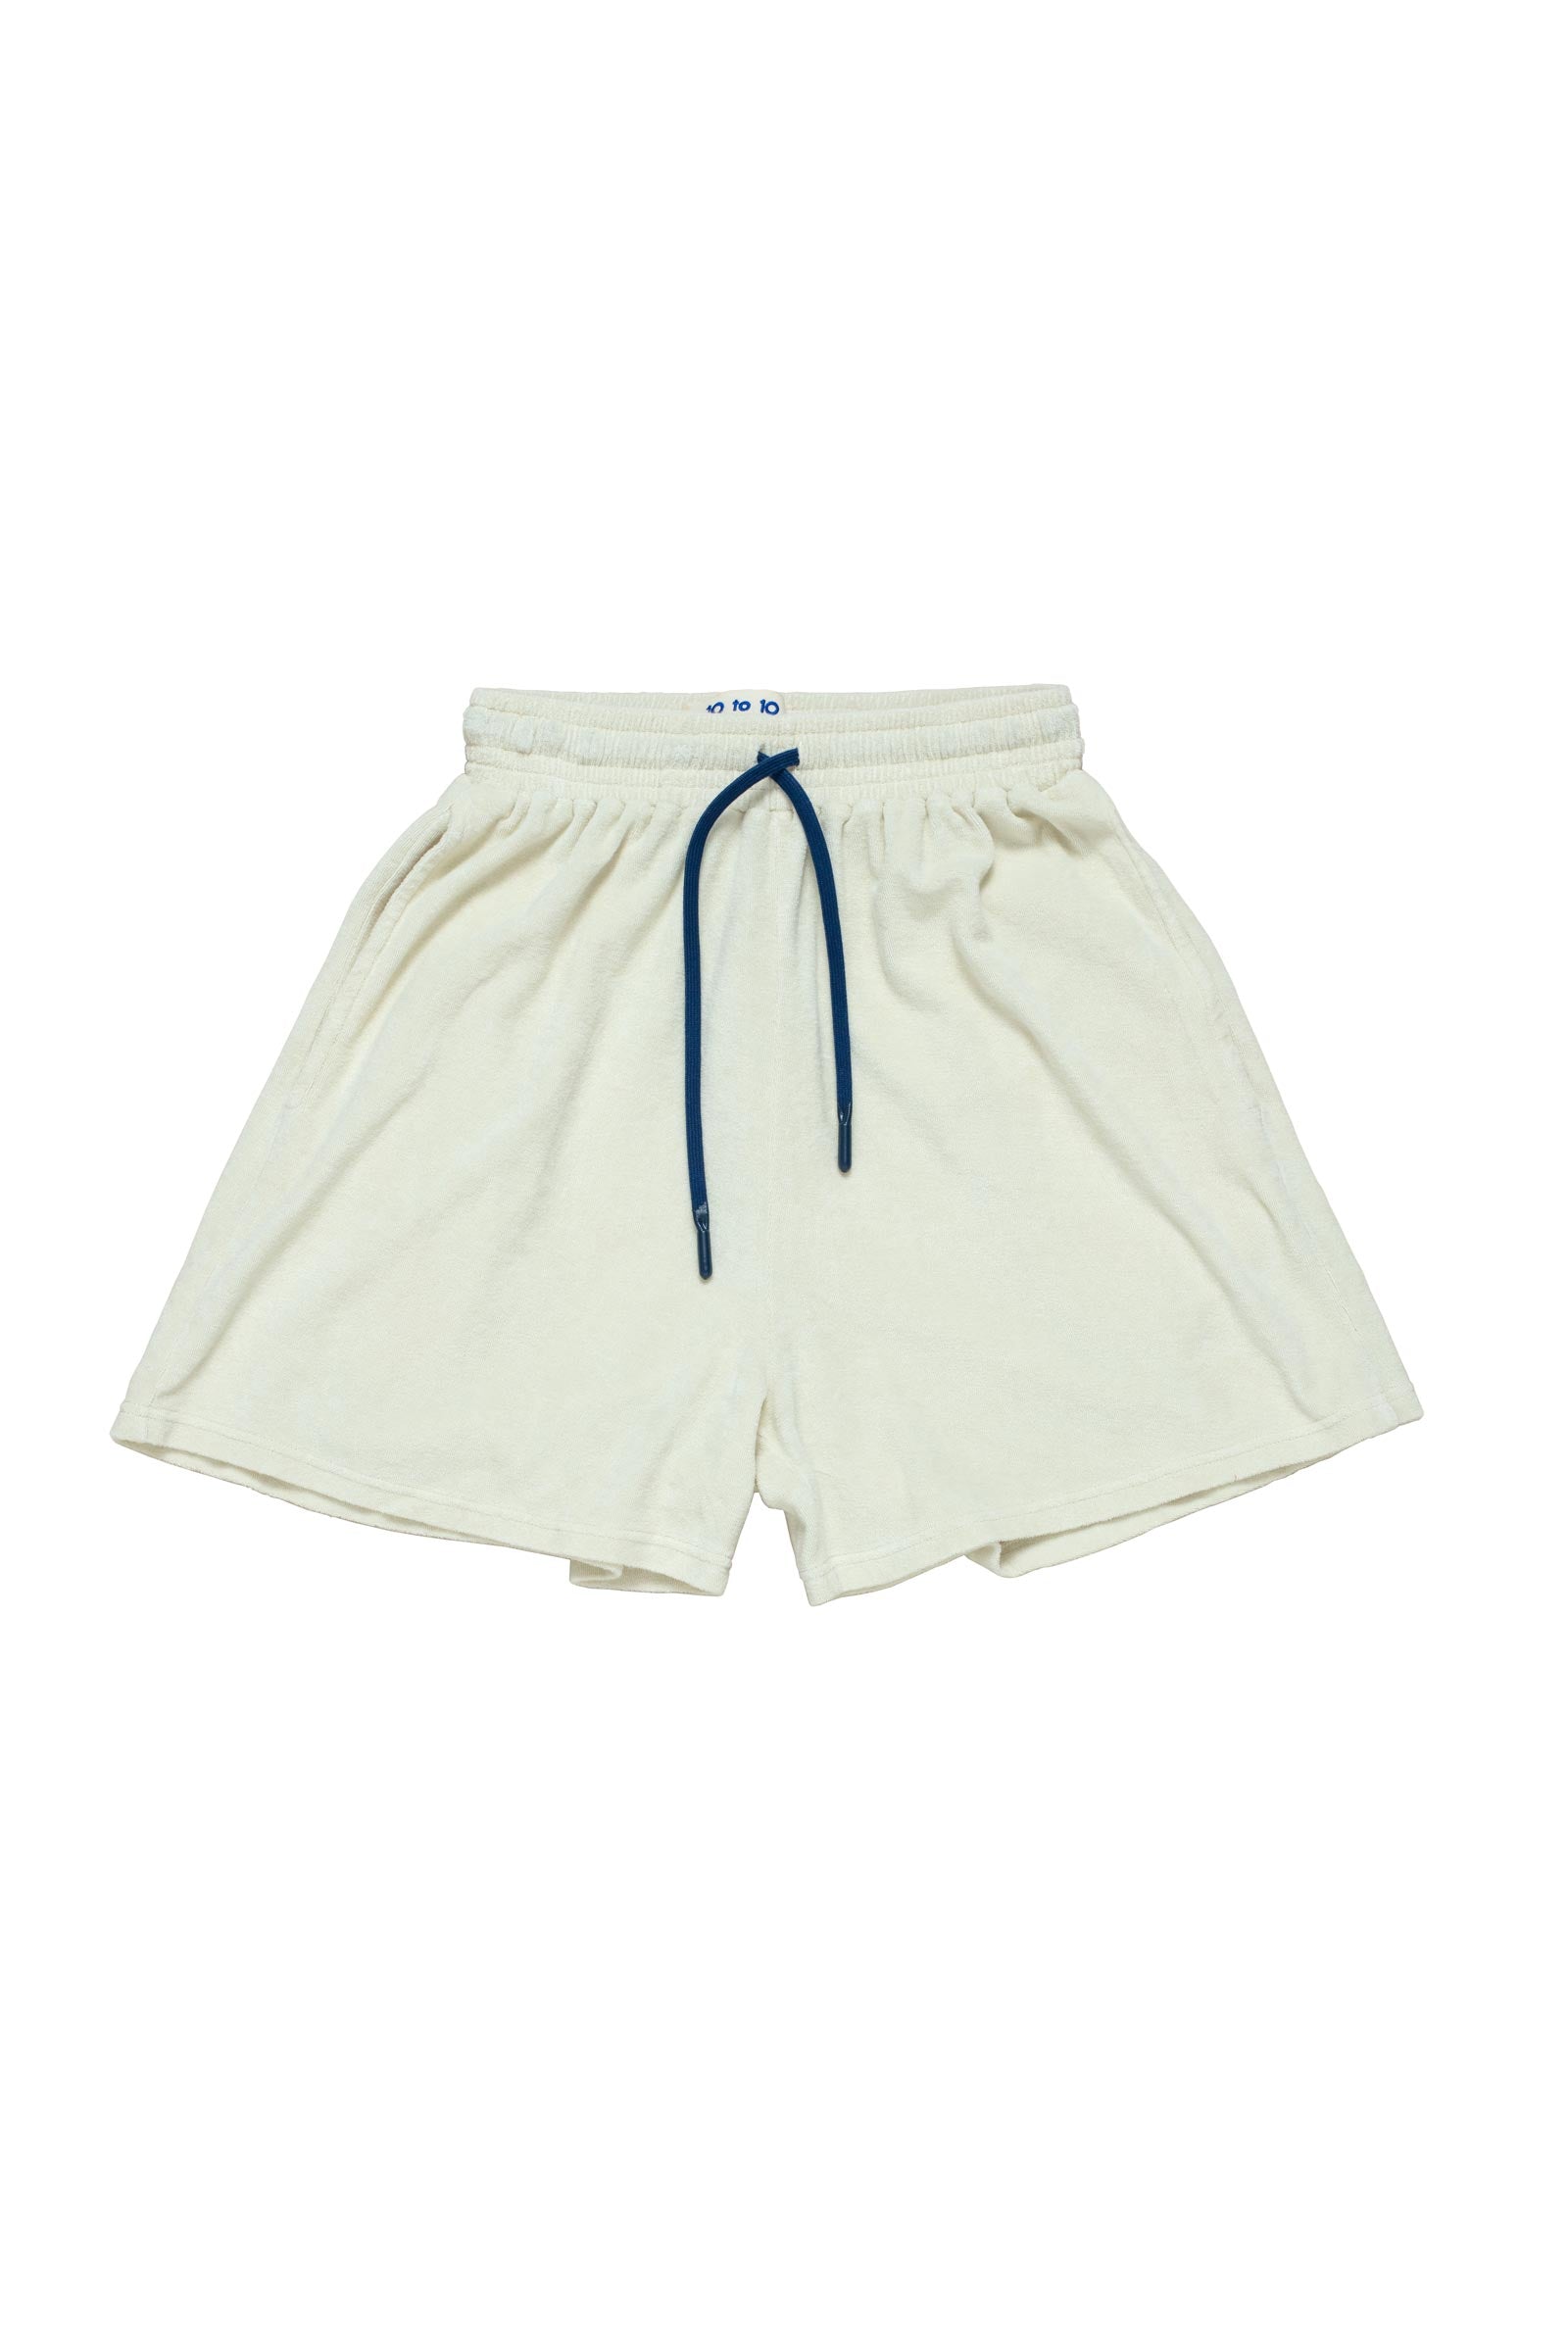 10 to 10 Cotton shorts in beige colour with blue cord